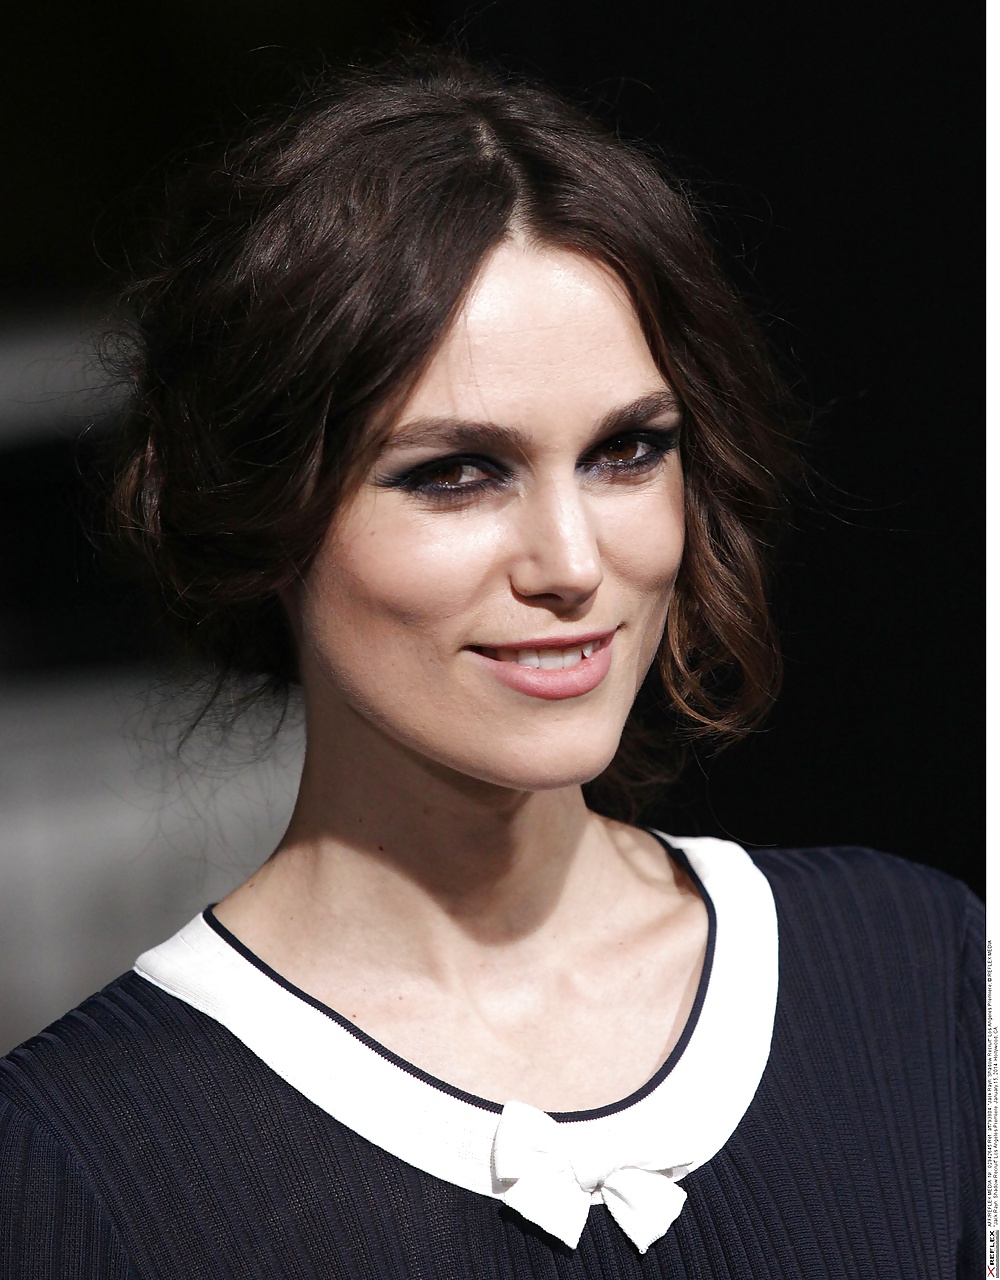 Keira Knightley The Royal Lady of England #35649593